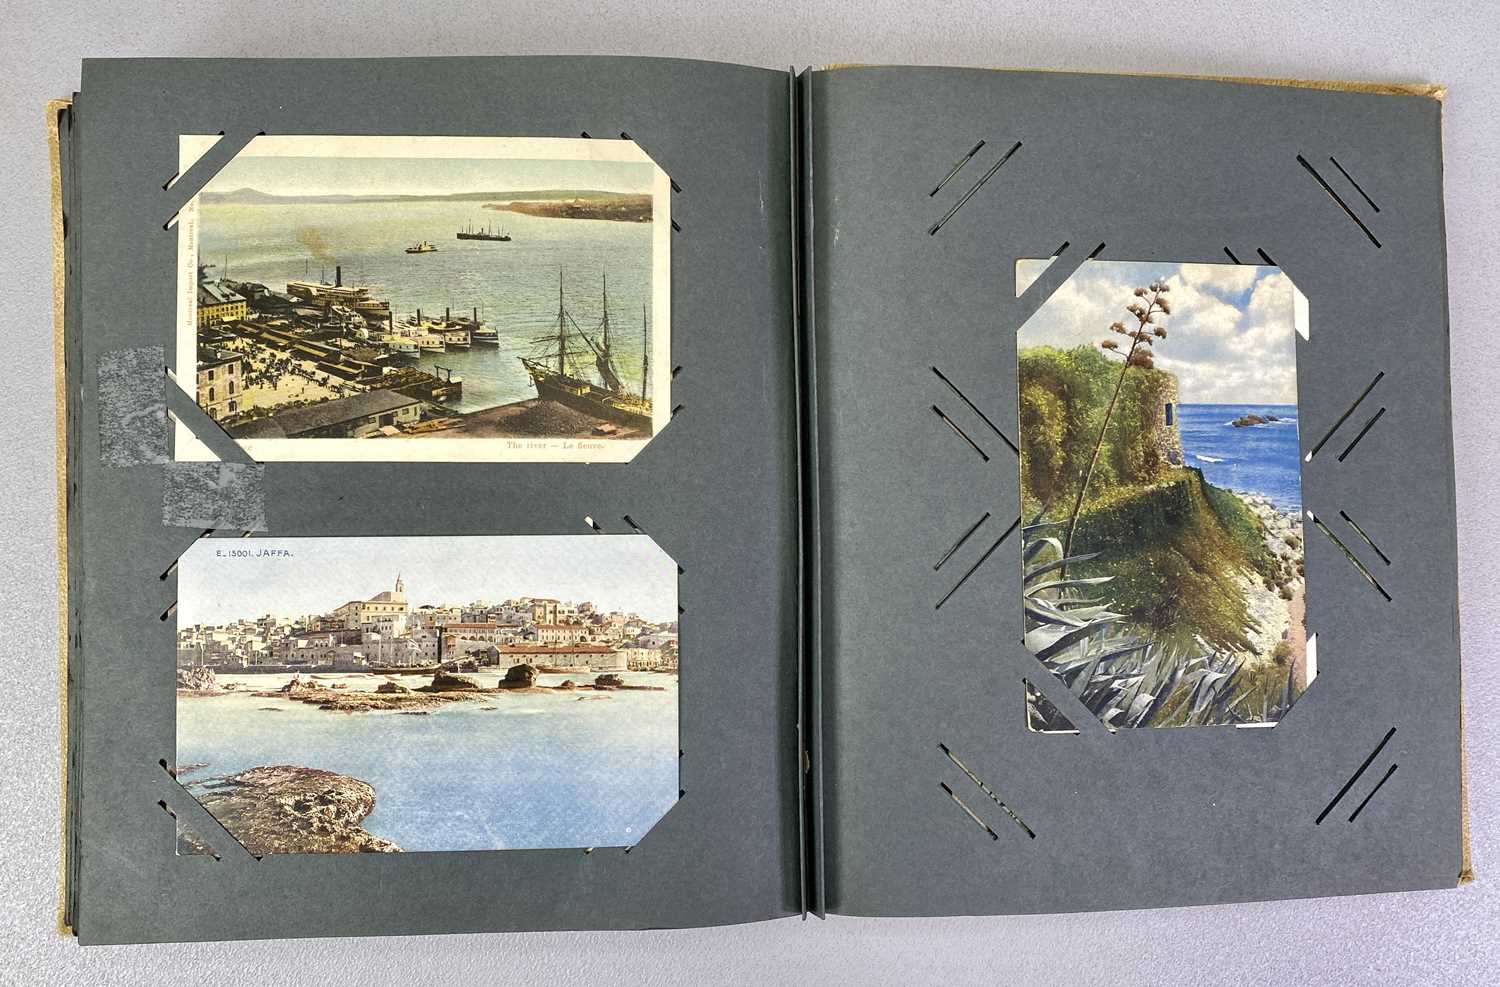 TWO ALBUMS CONTAINING VINTAGE BRITISH POSTCARDS - Foreign and Channel Islands, over 270 in total - Image 4 of 7